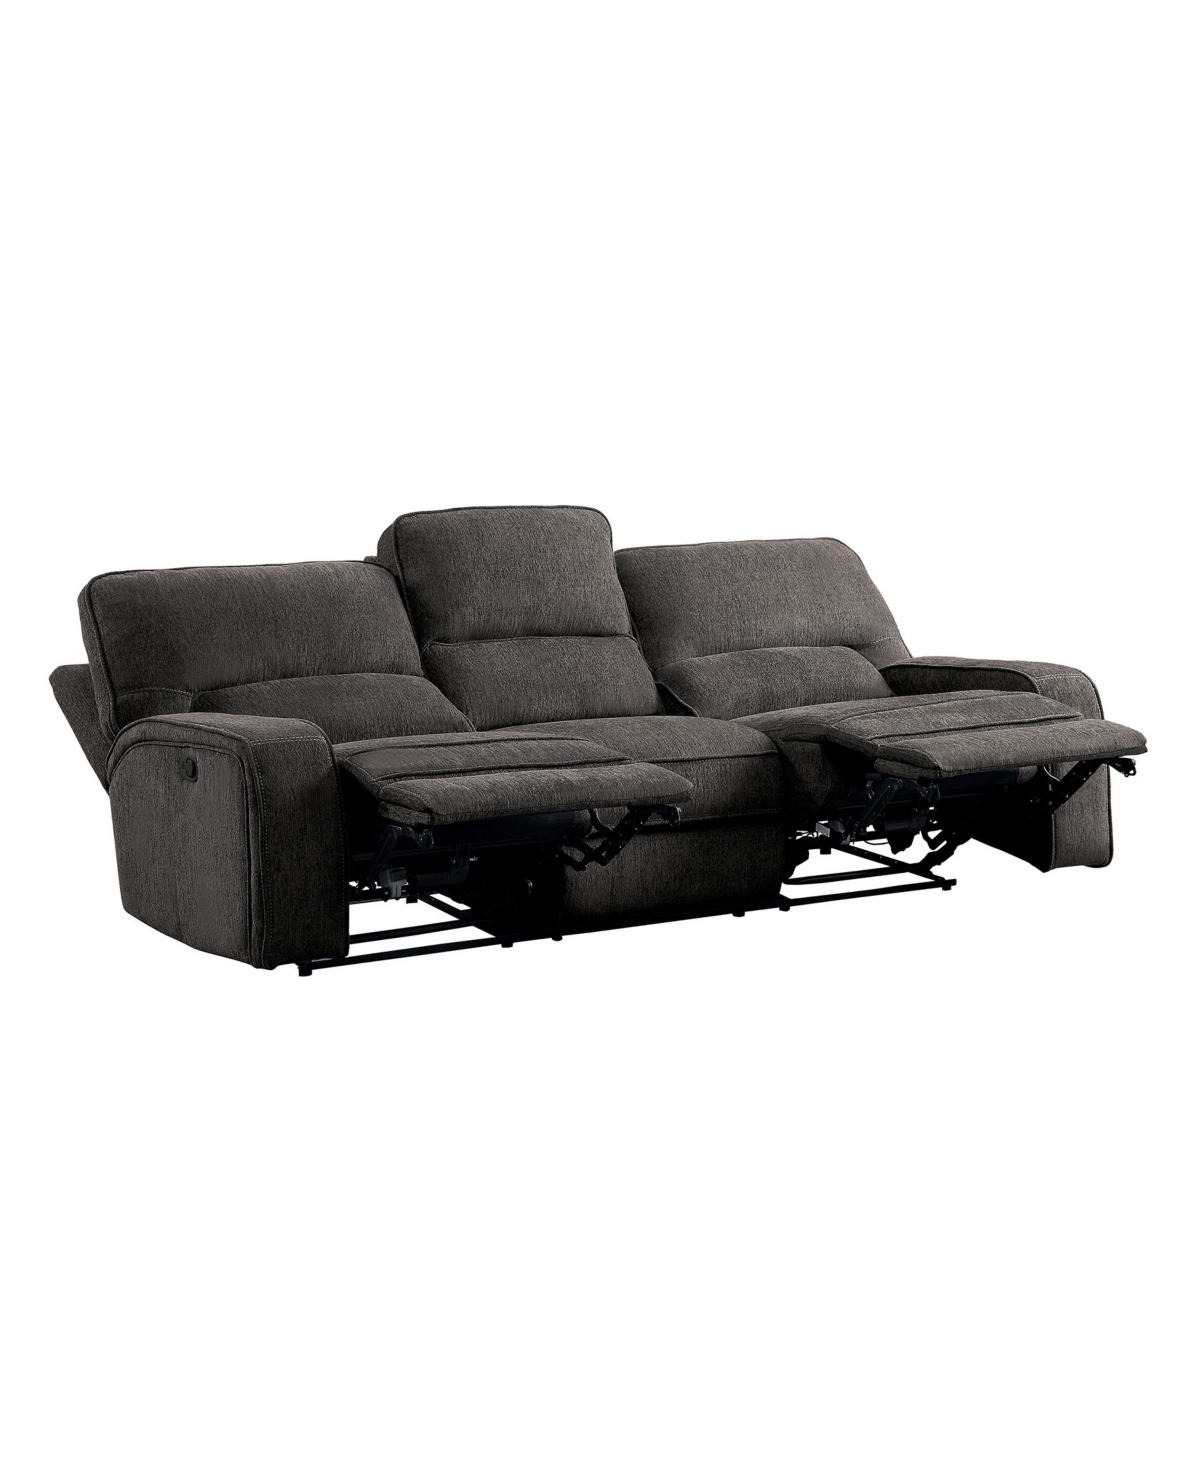 Elevated Power Recliner Sofa